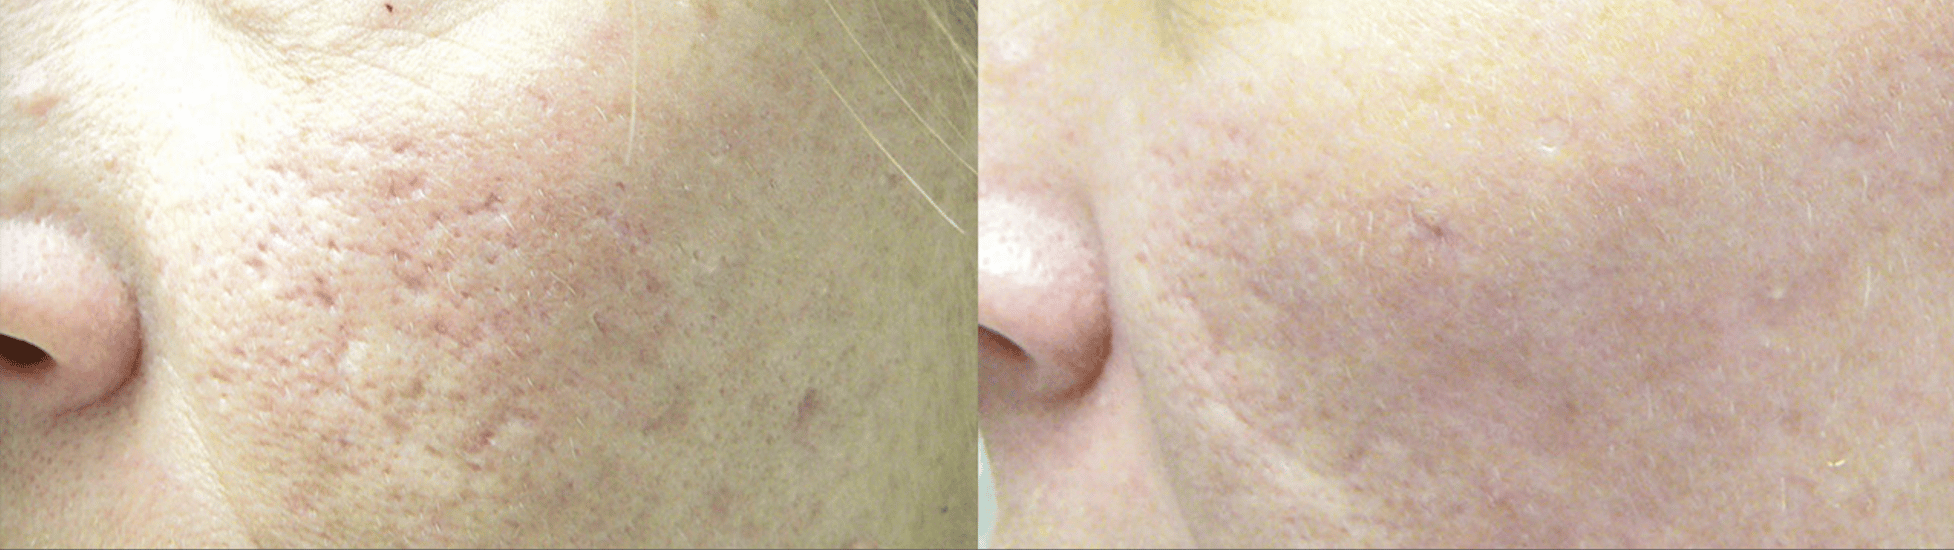 laser resurfacing before and after results in NYC